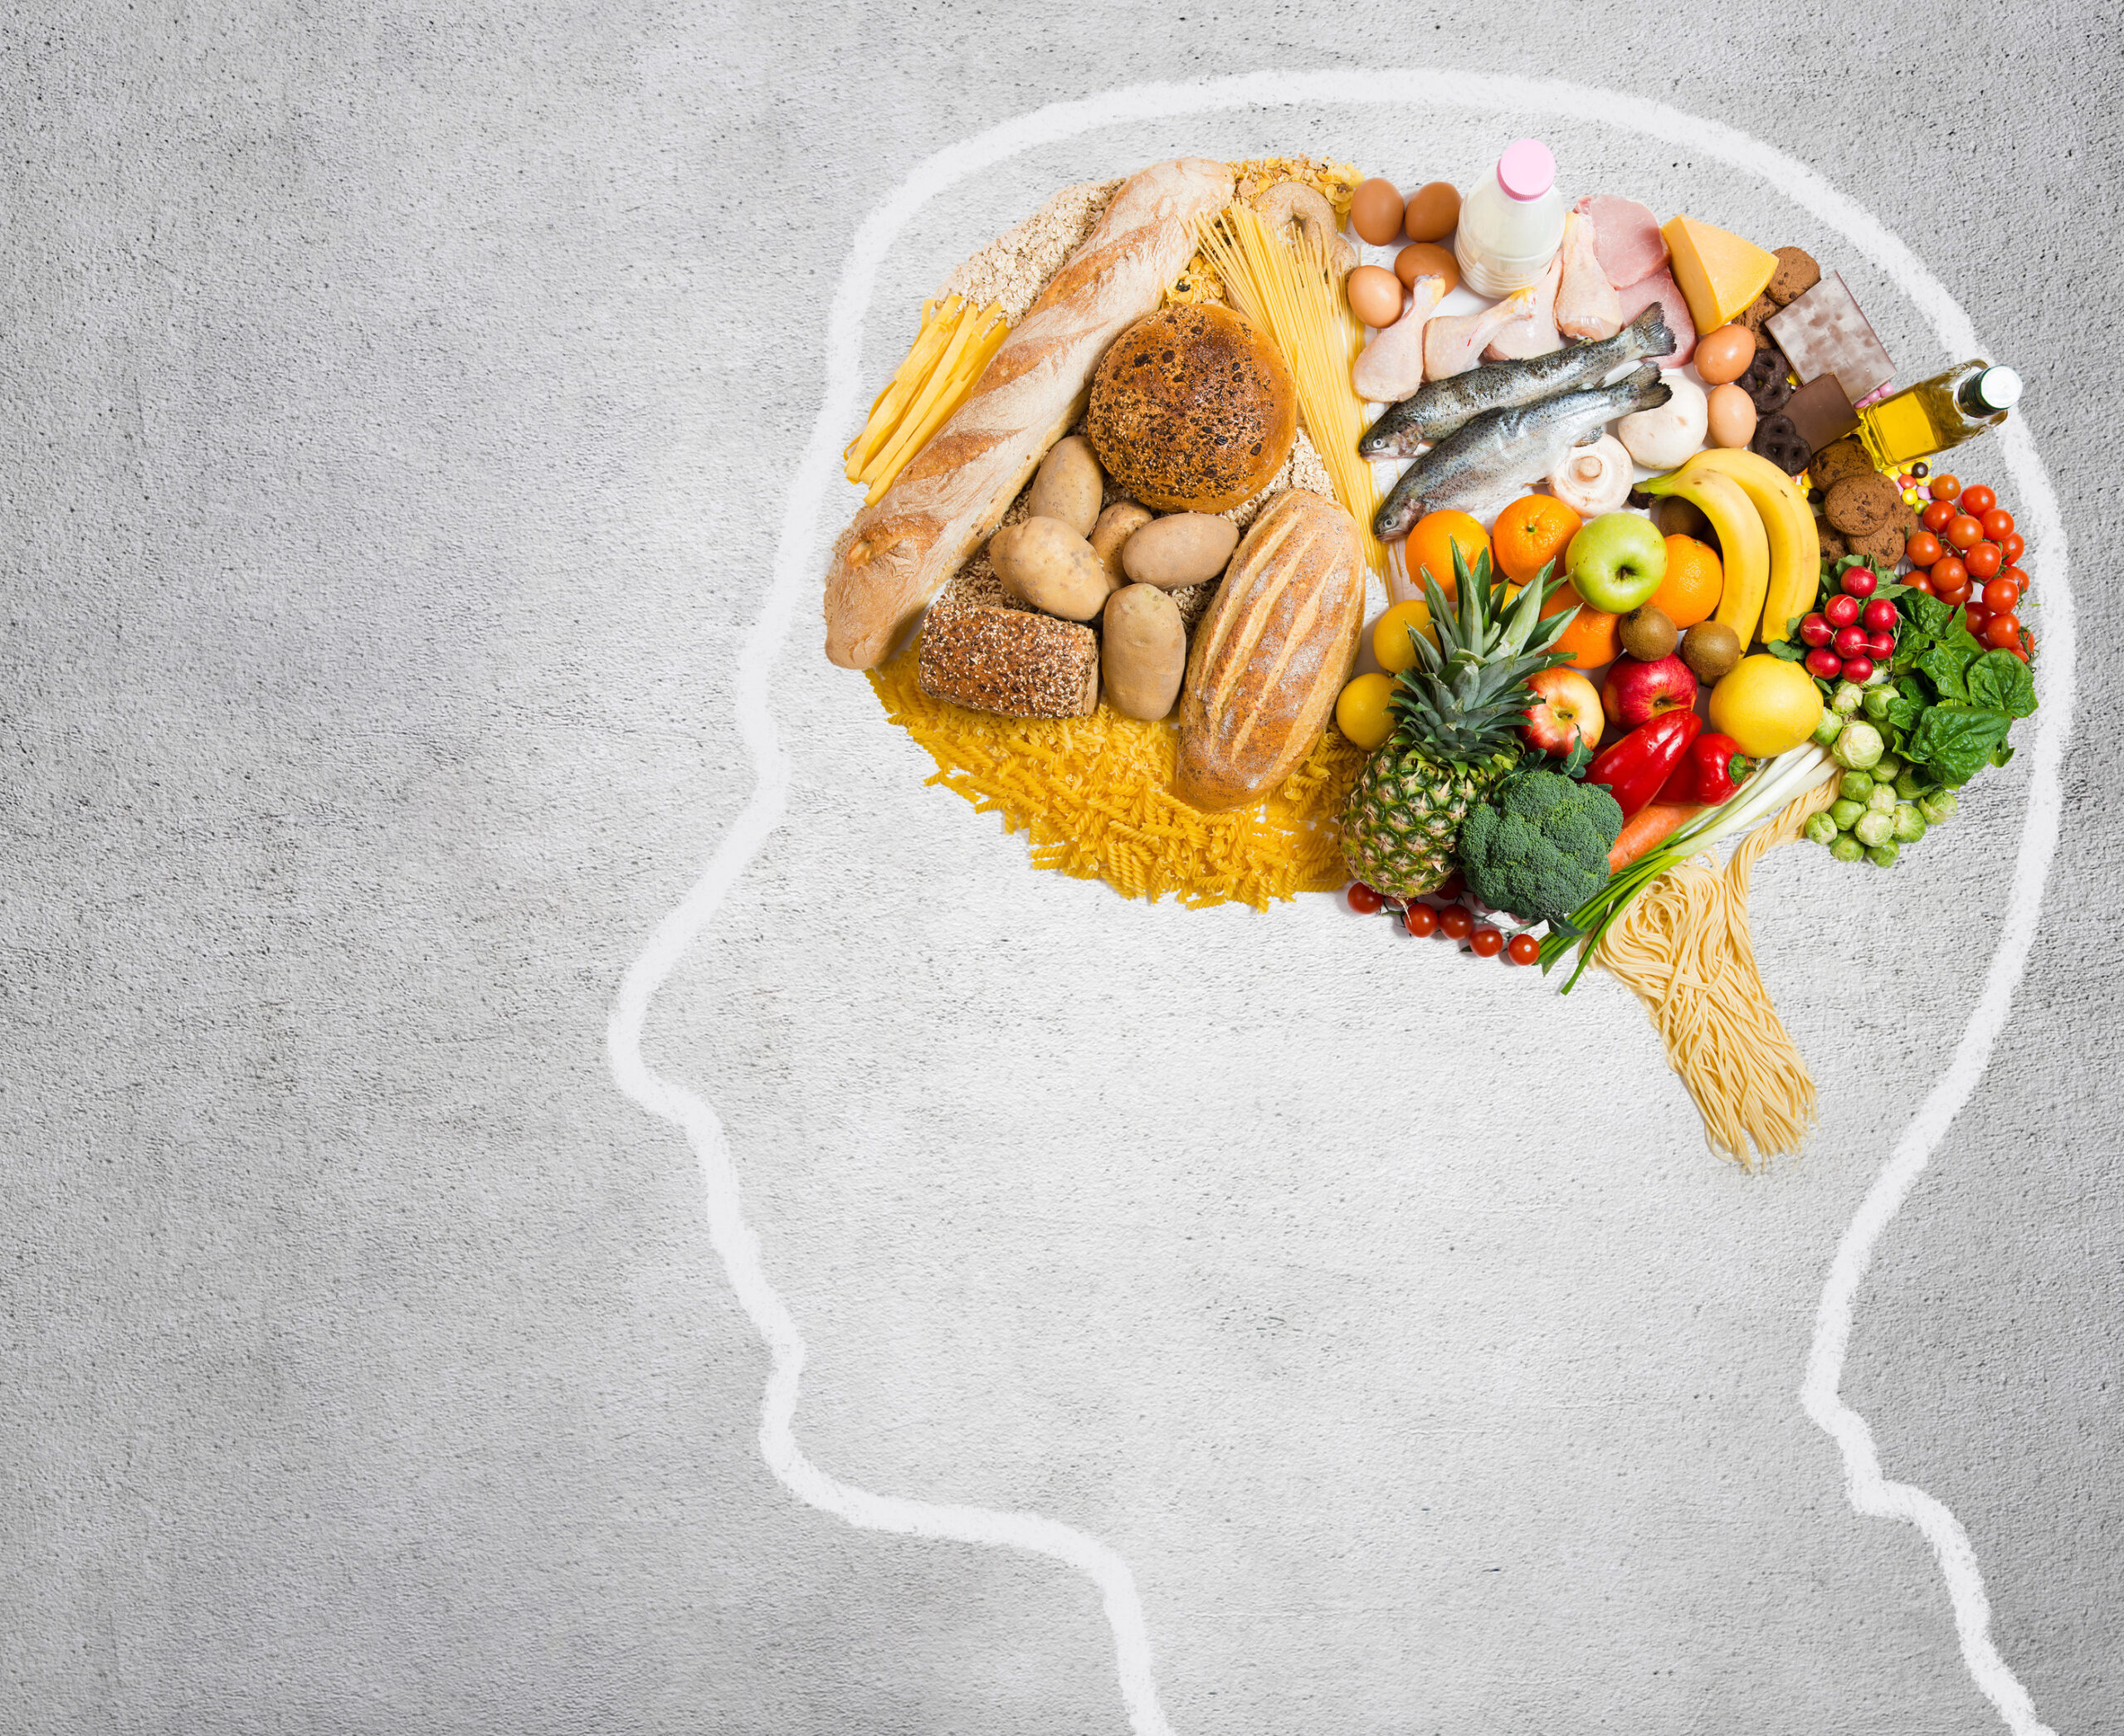 The Impact of Diet on Neurological Health